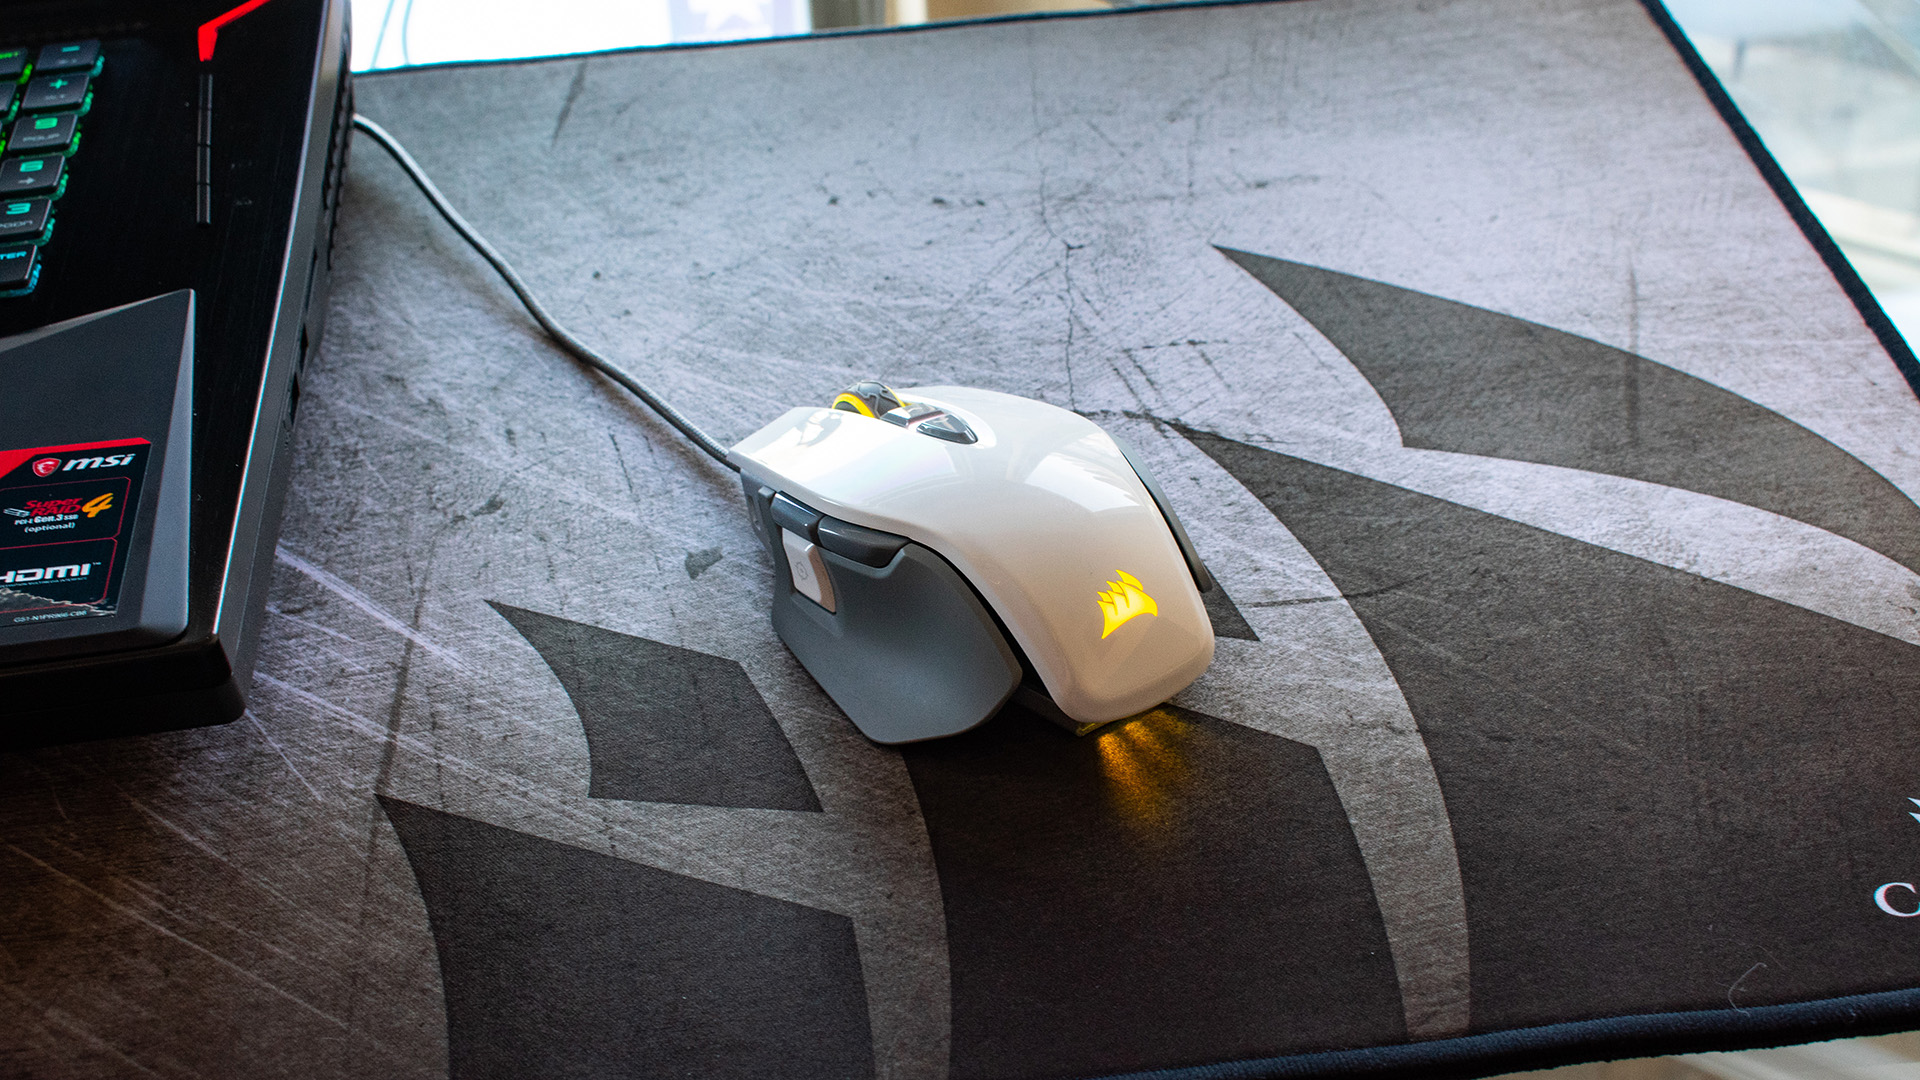 Corsair M65 RGB Ultra review: A worthy rival for Razer's flagship